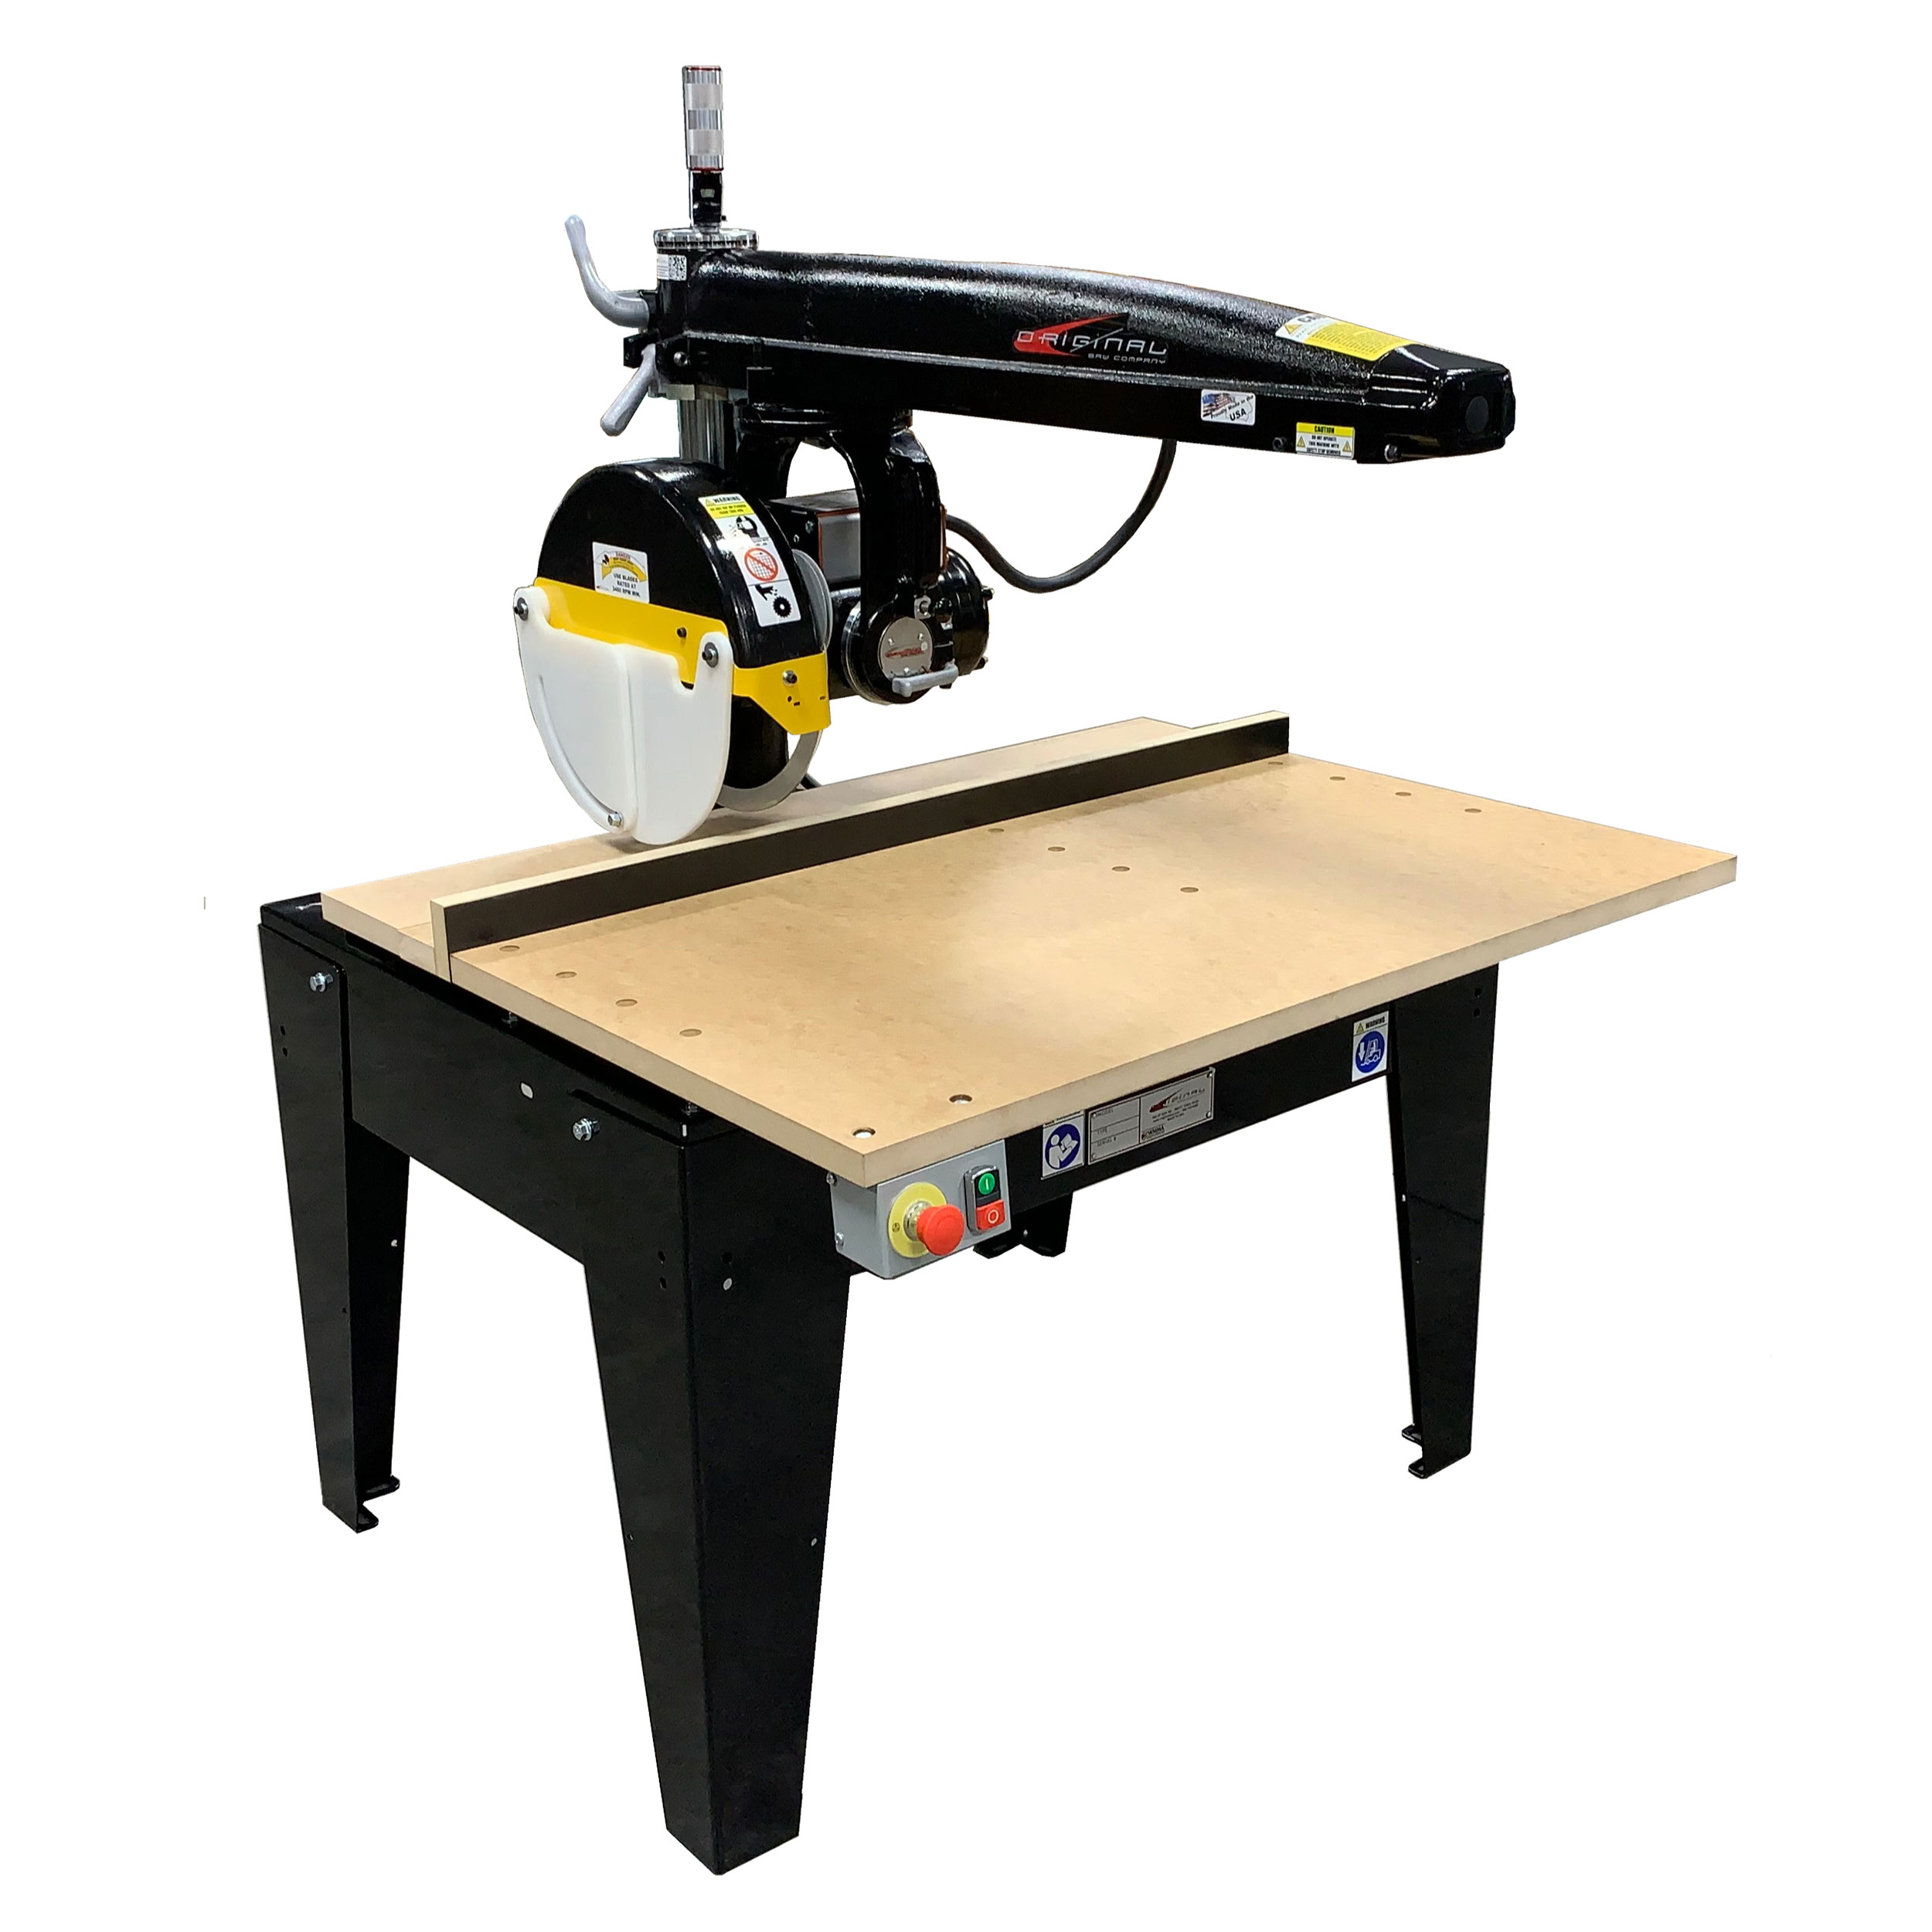 Radial Arm Saw With 14" Blade And 24" Crosscut, 5hp 3 Phase 460v